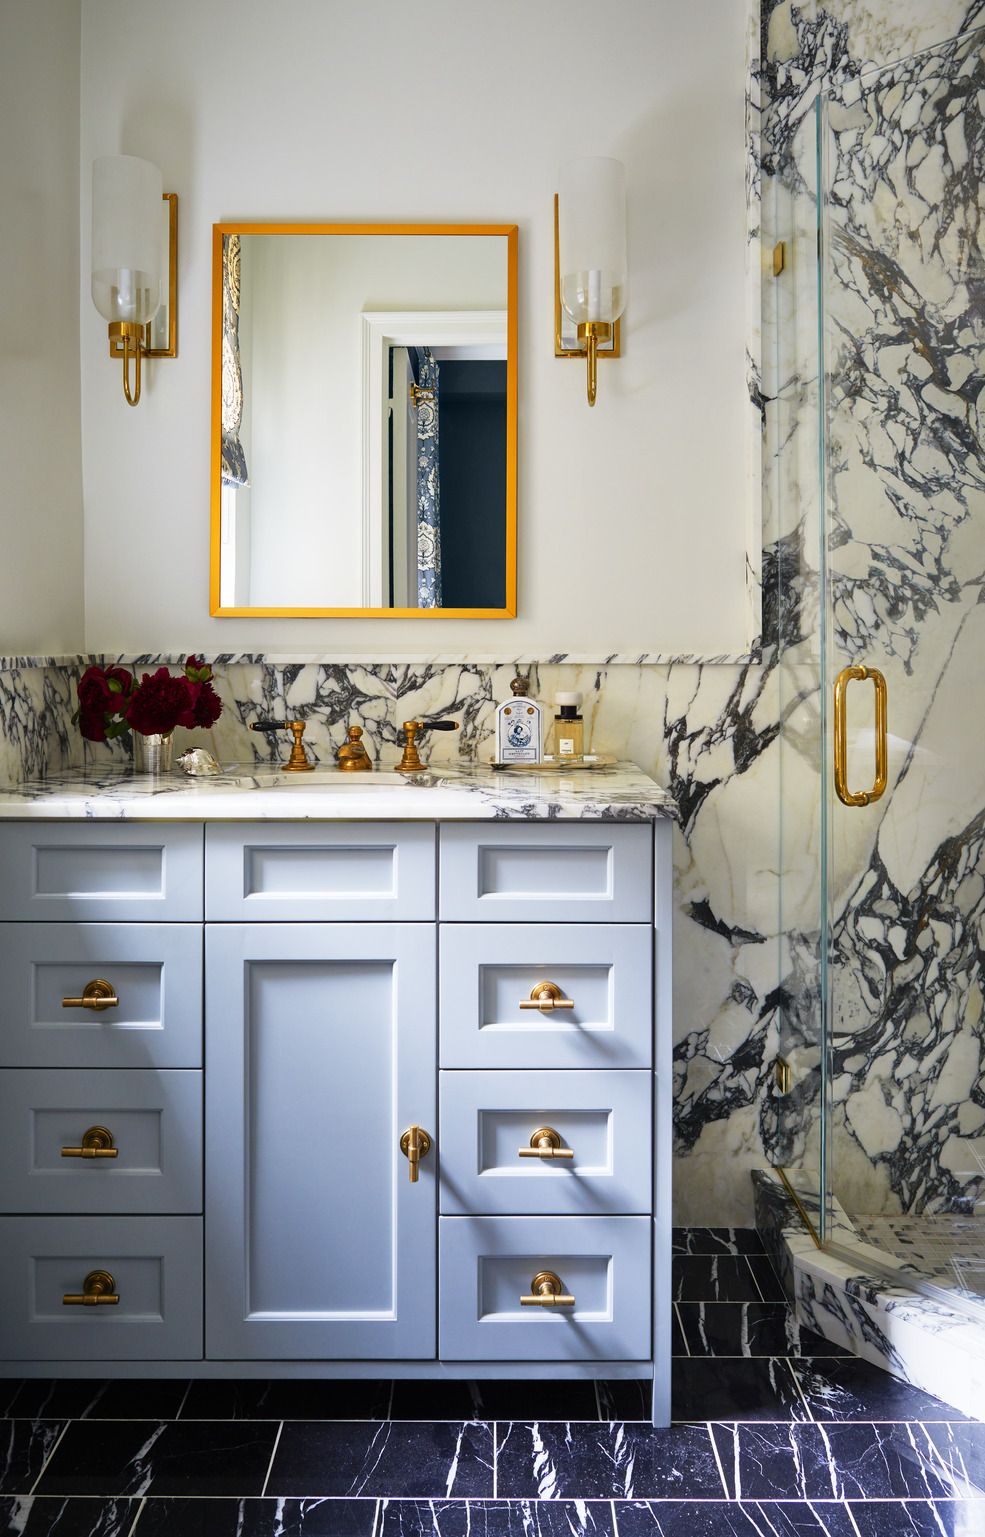 16 Modern Bathroom Ideas to Recreate In Your Own Home